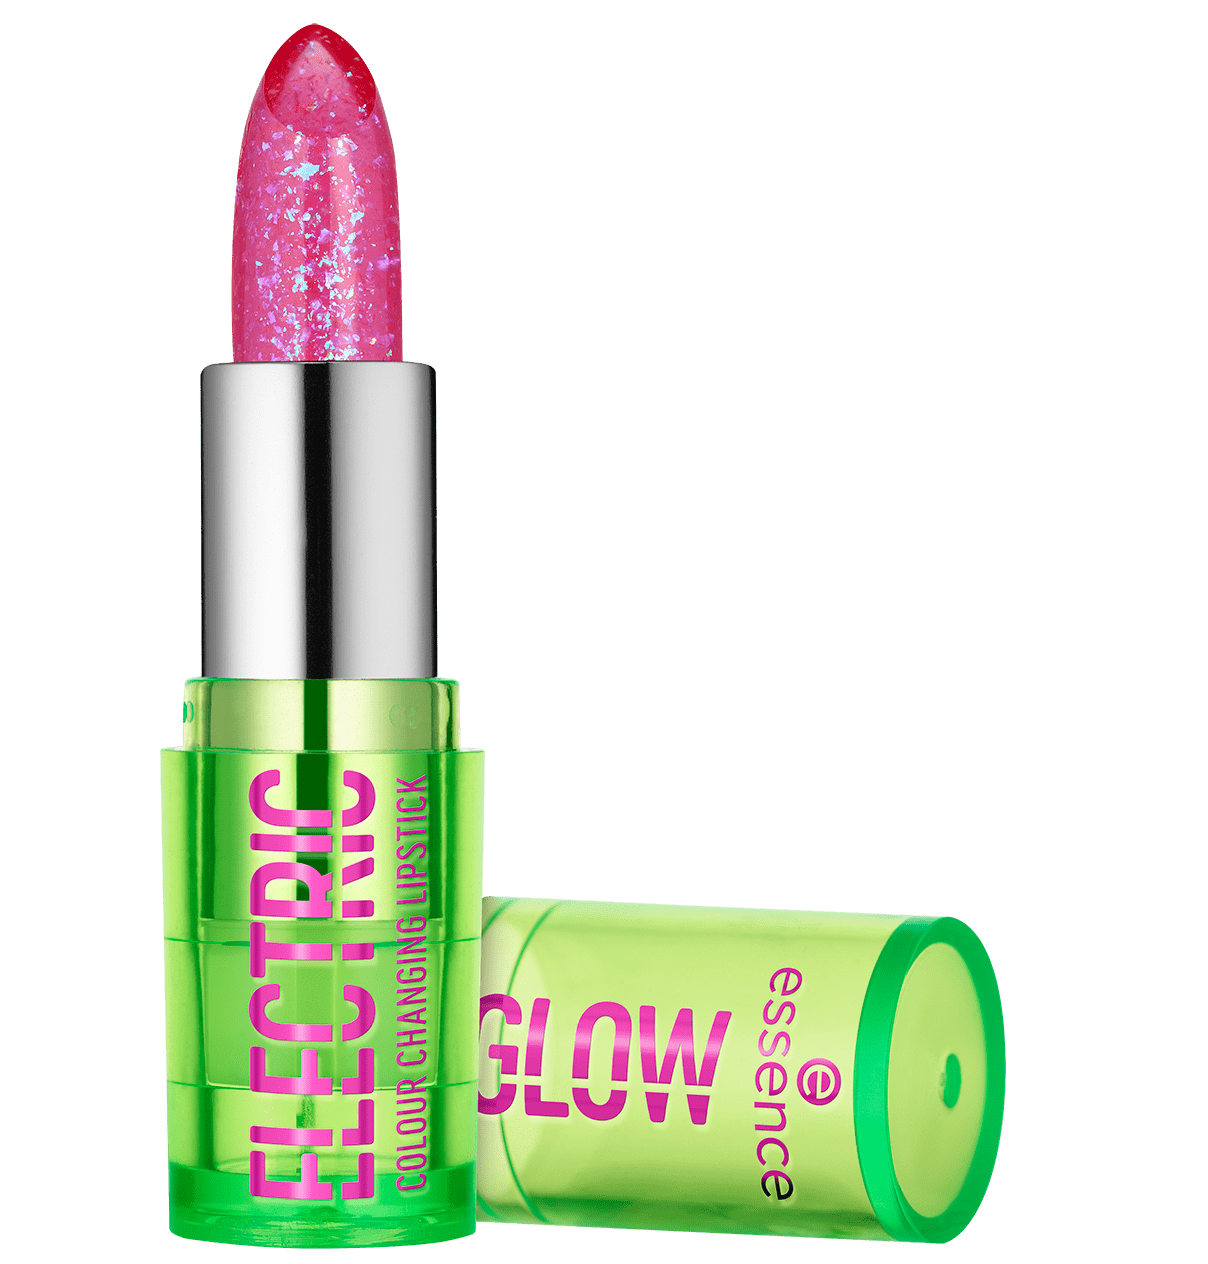 essence ELECTRIC GLOW colour changing lipstick Image Front View Full Open png